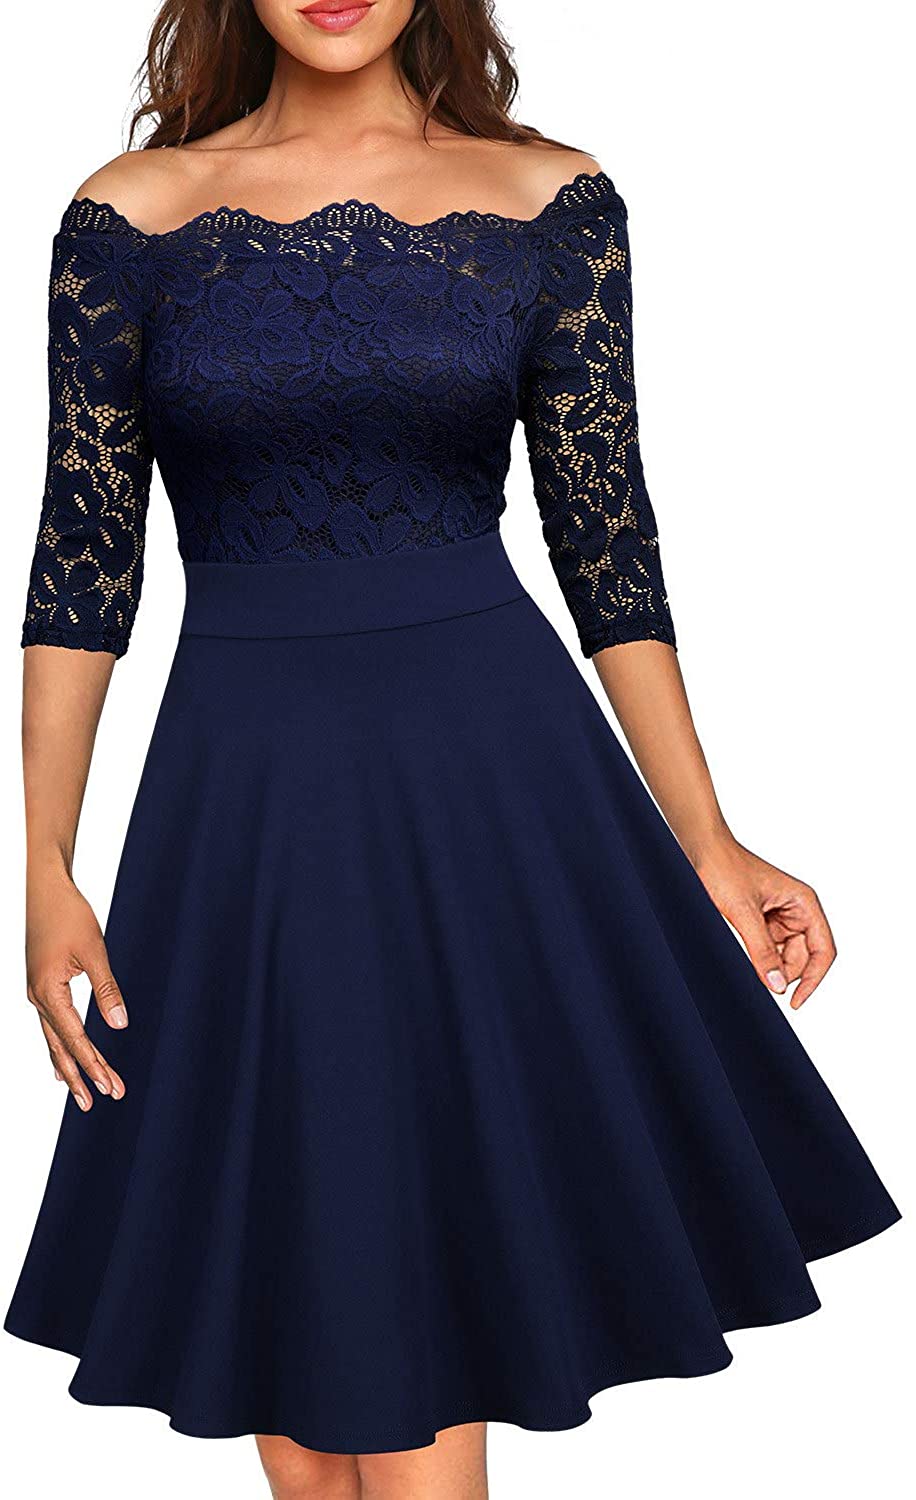 Price:$29.99    MISSMAY Women's Vintage Floral Lace Half Sleeve Boat Neck Formal Swing Dress  Clothing